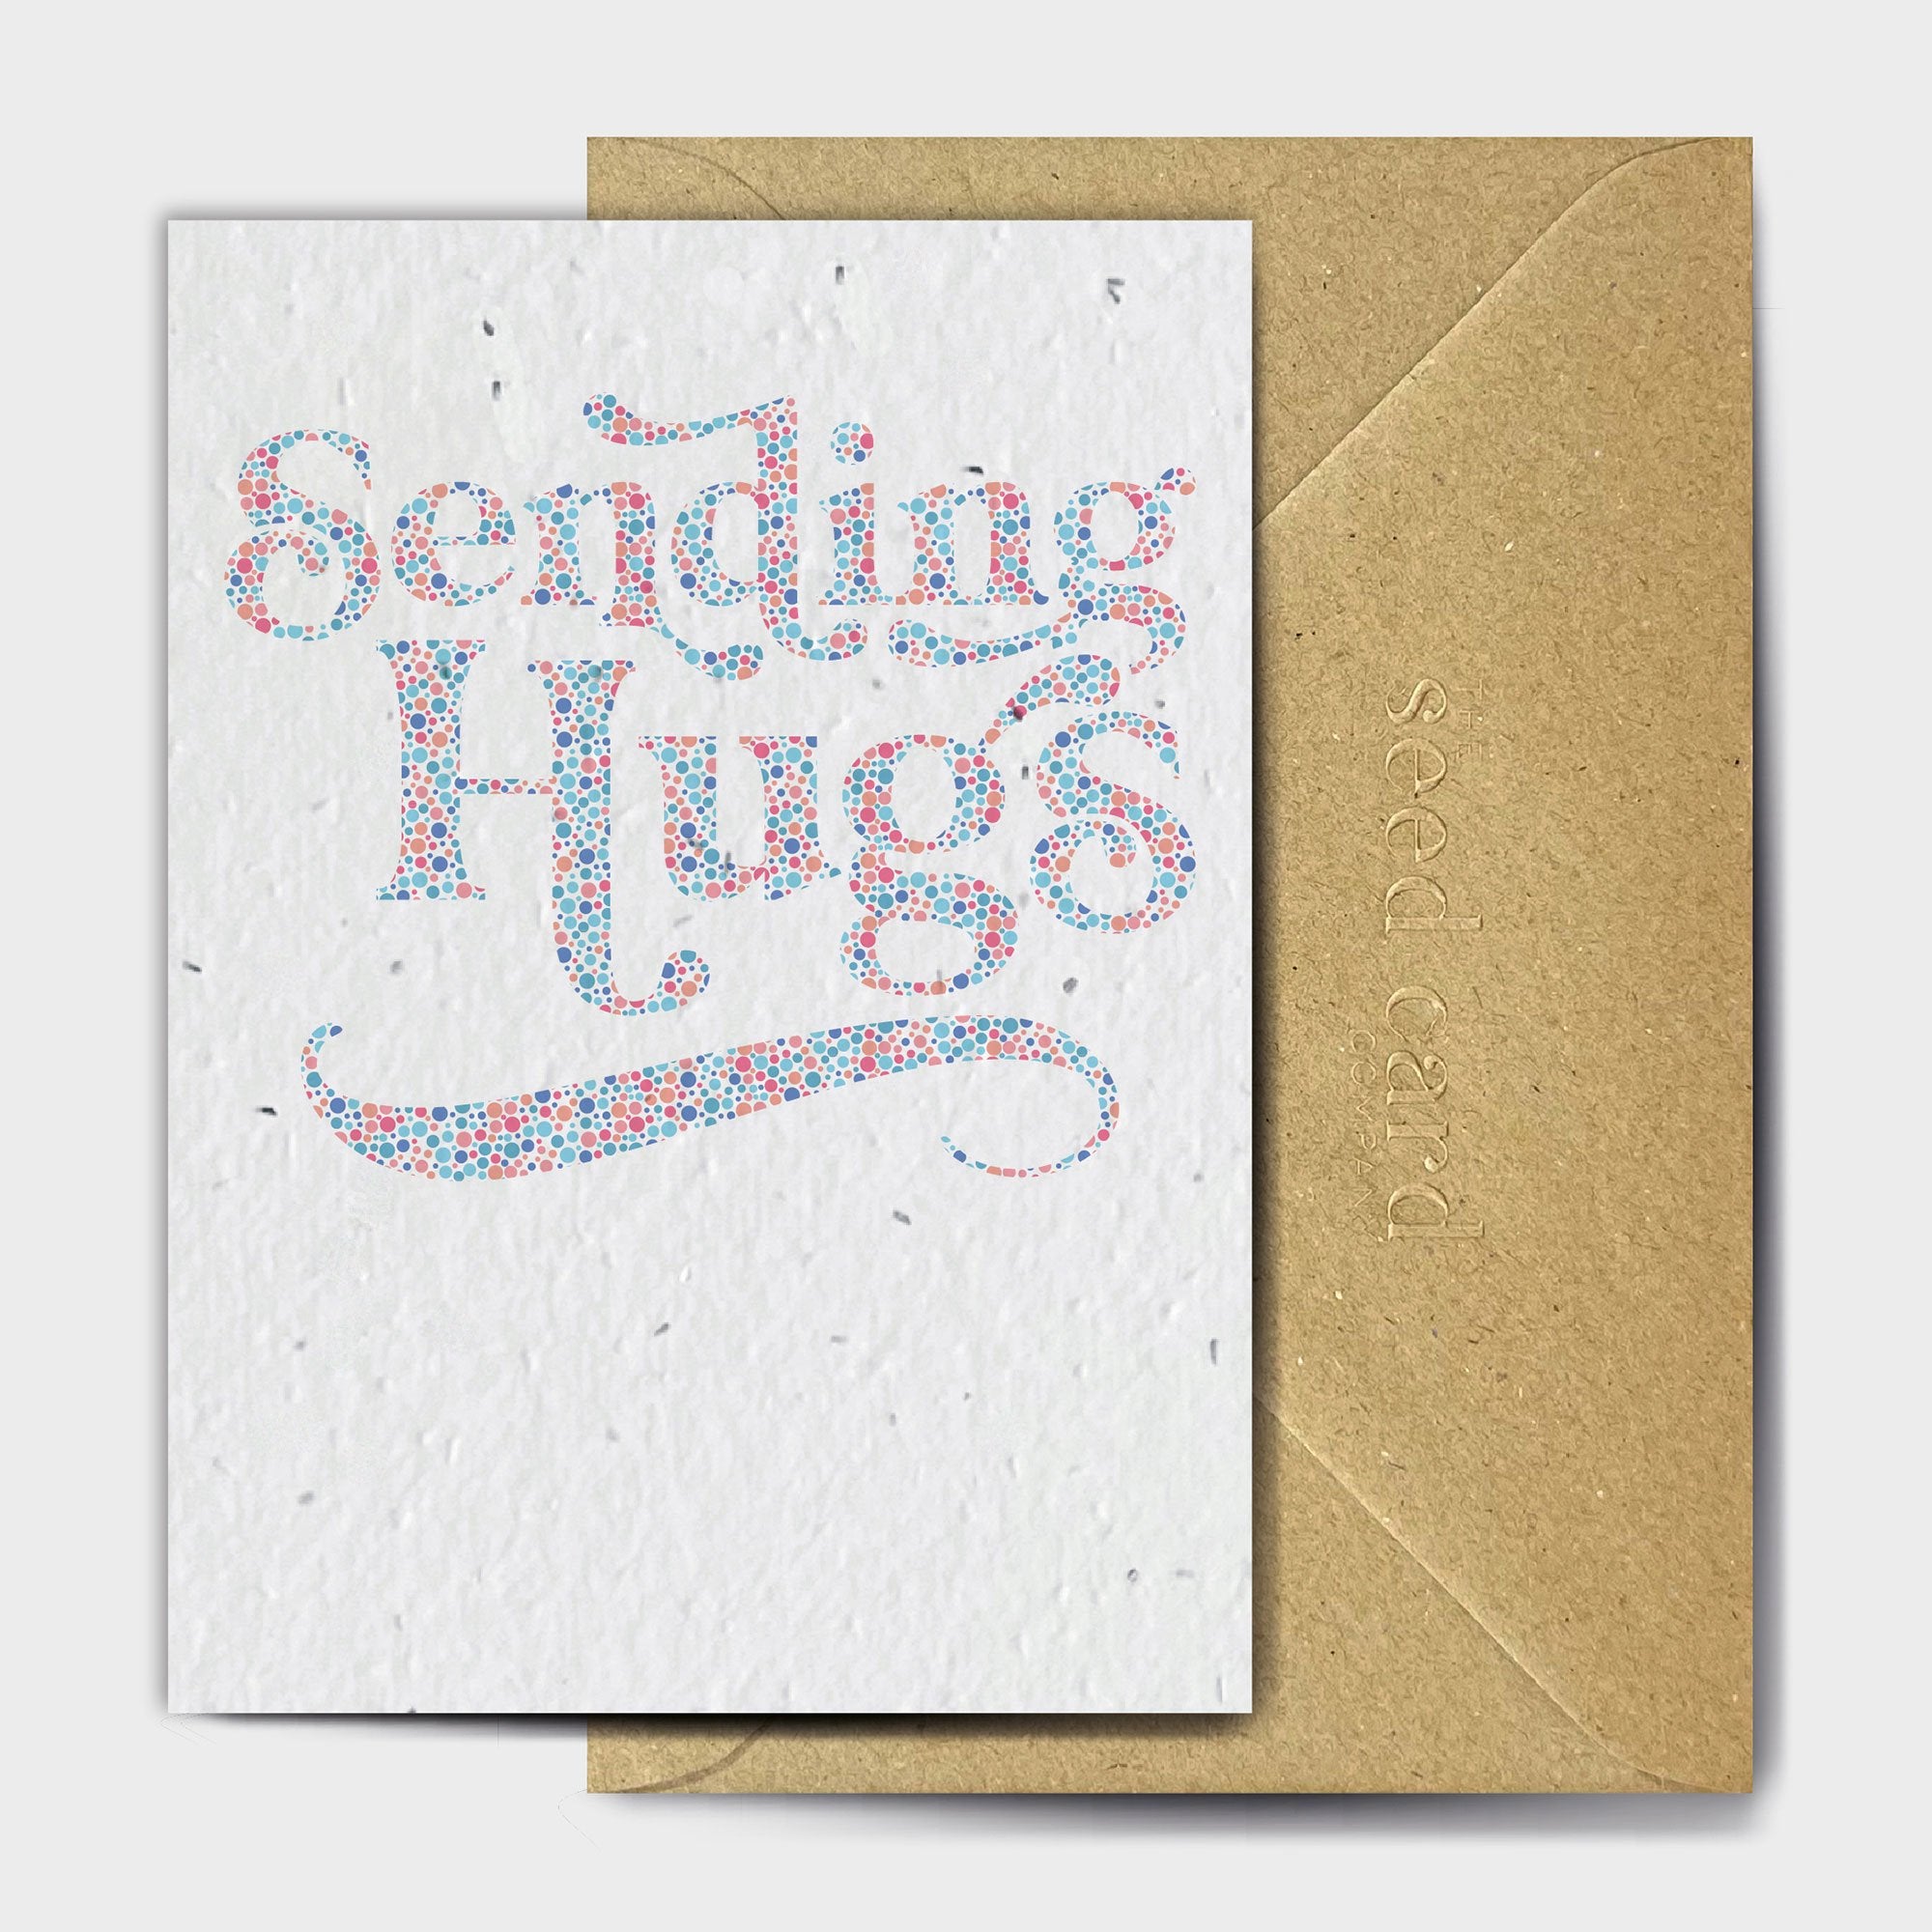 Shop online Sending Dots of Hugs - 100% biodegradable seed-embedded cards Shop -The Seed Card Company